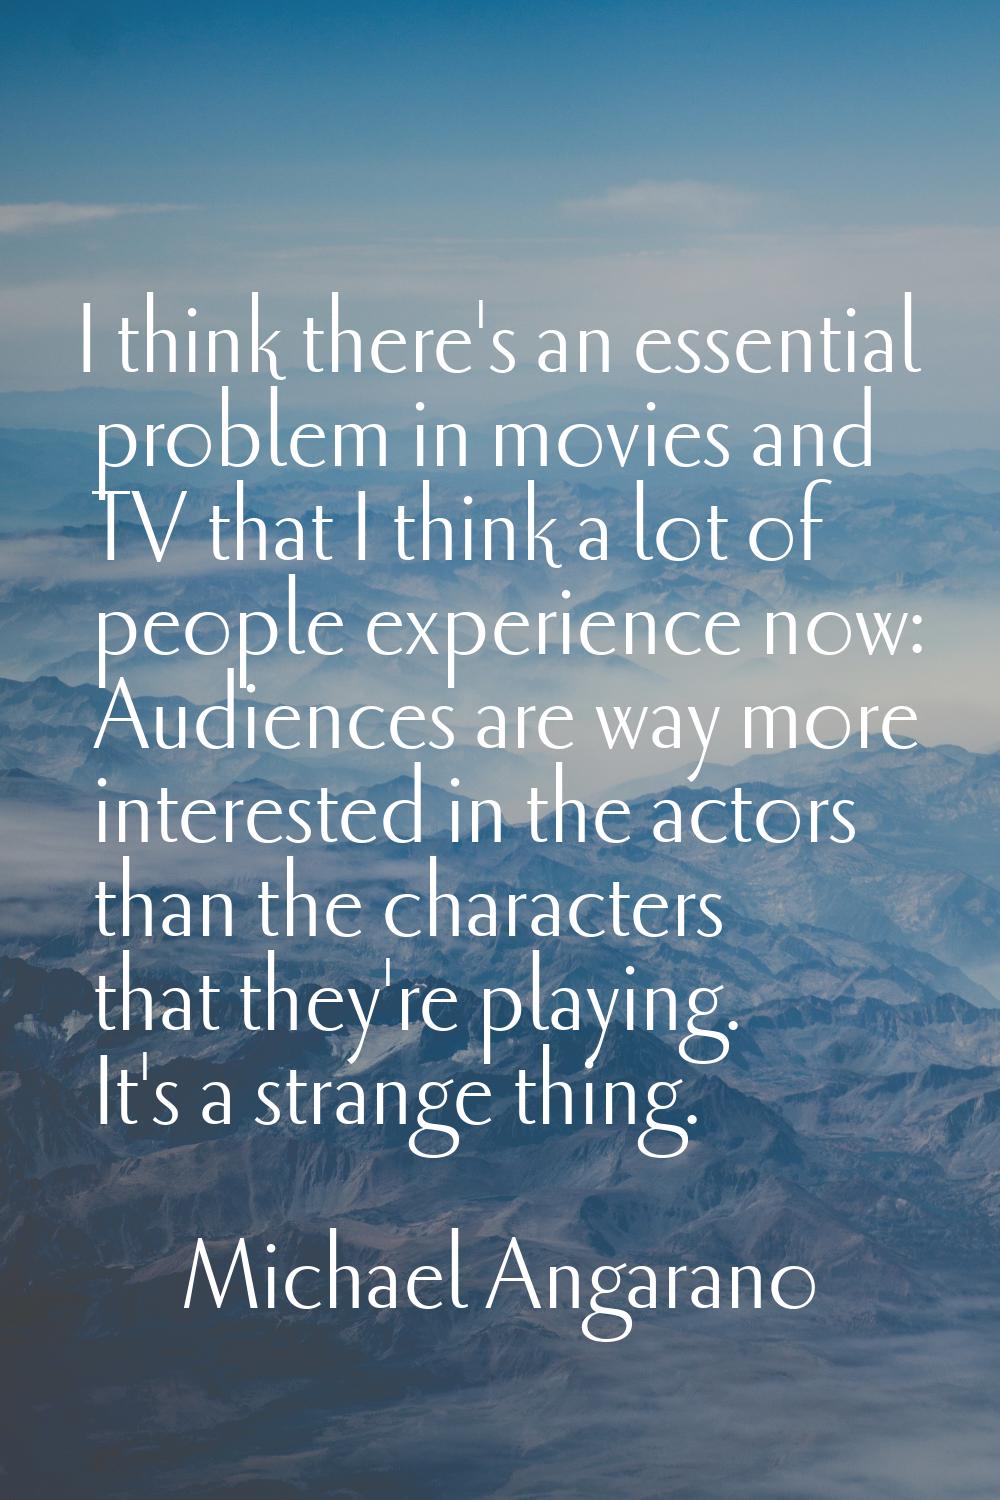 I think there's an essential problem in movies and TV that I think a lot of people experience now: 